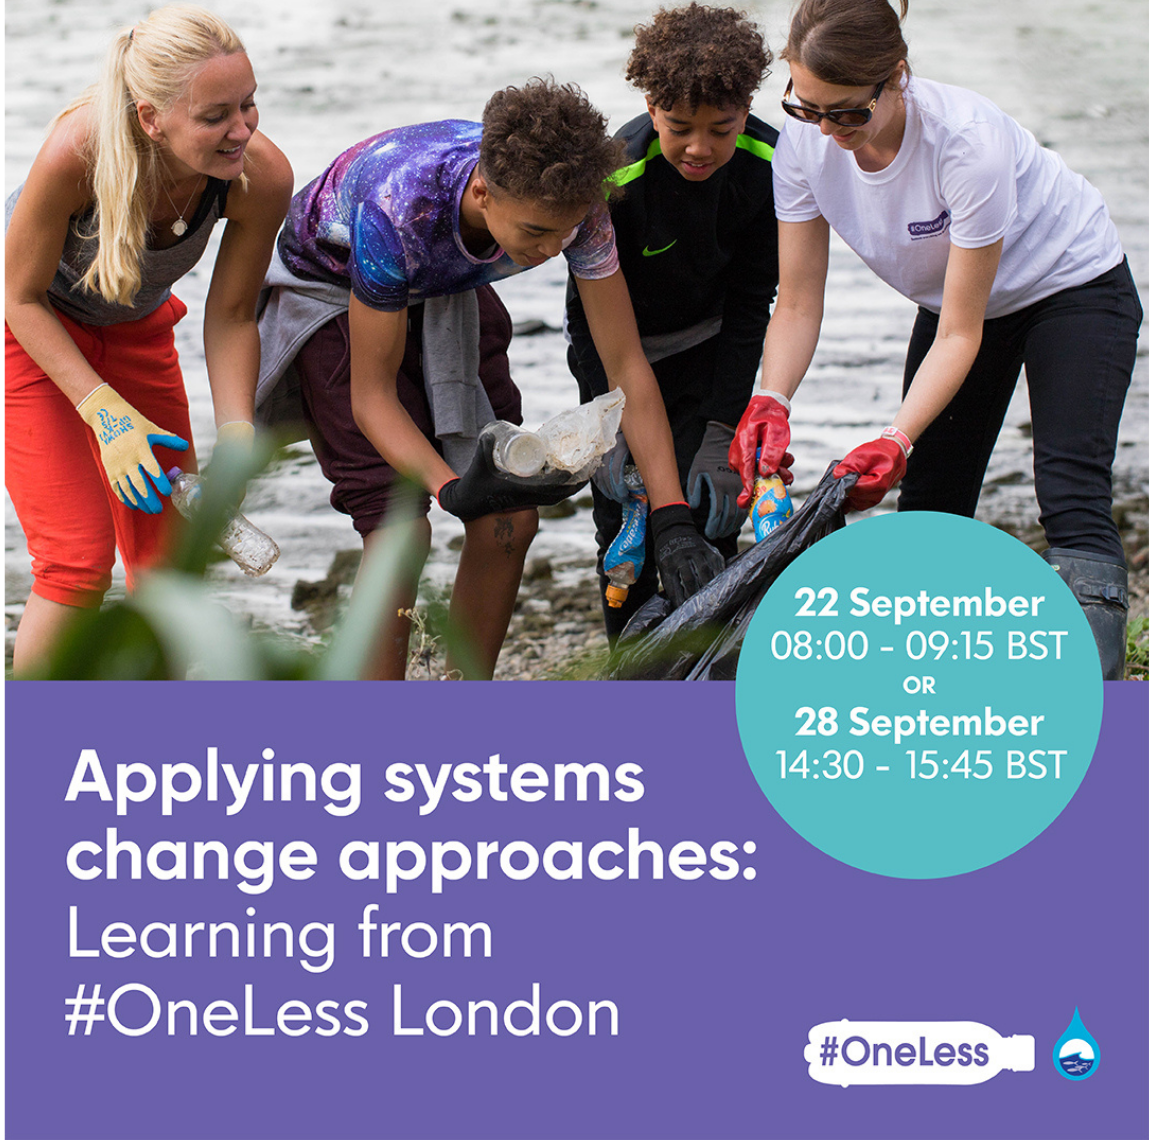 APPLYING SYSTEMS CHANGE APPROACHES: LEARNING FROM #ONELESS LONDON